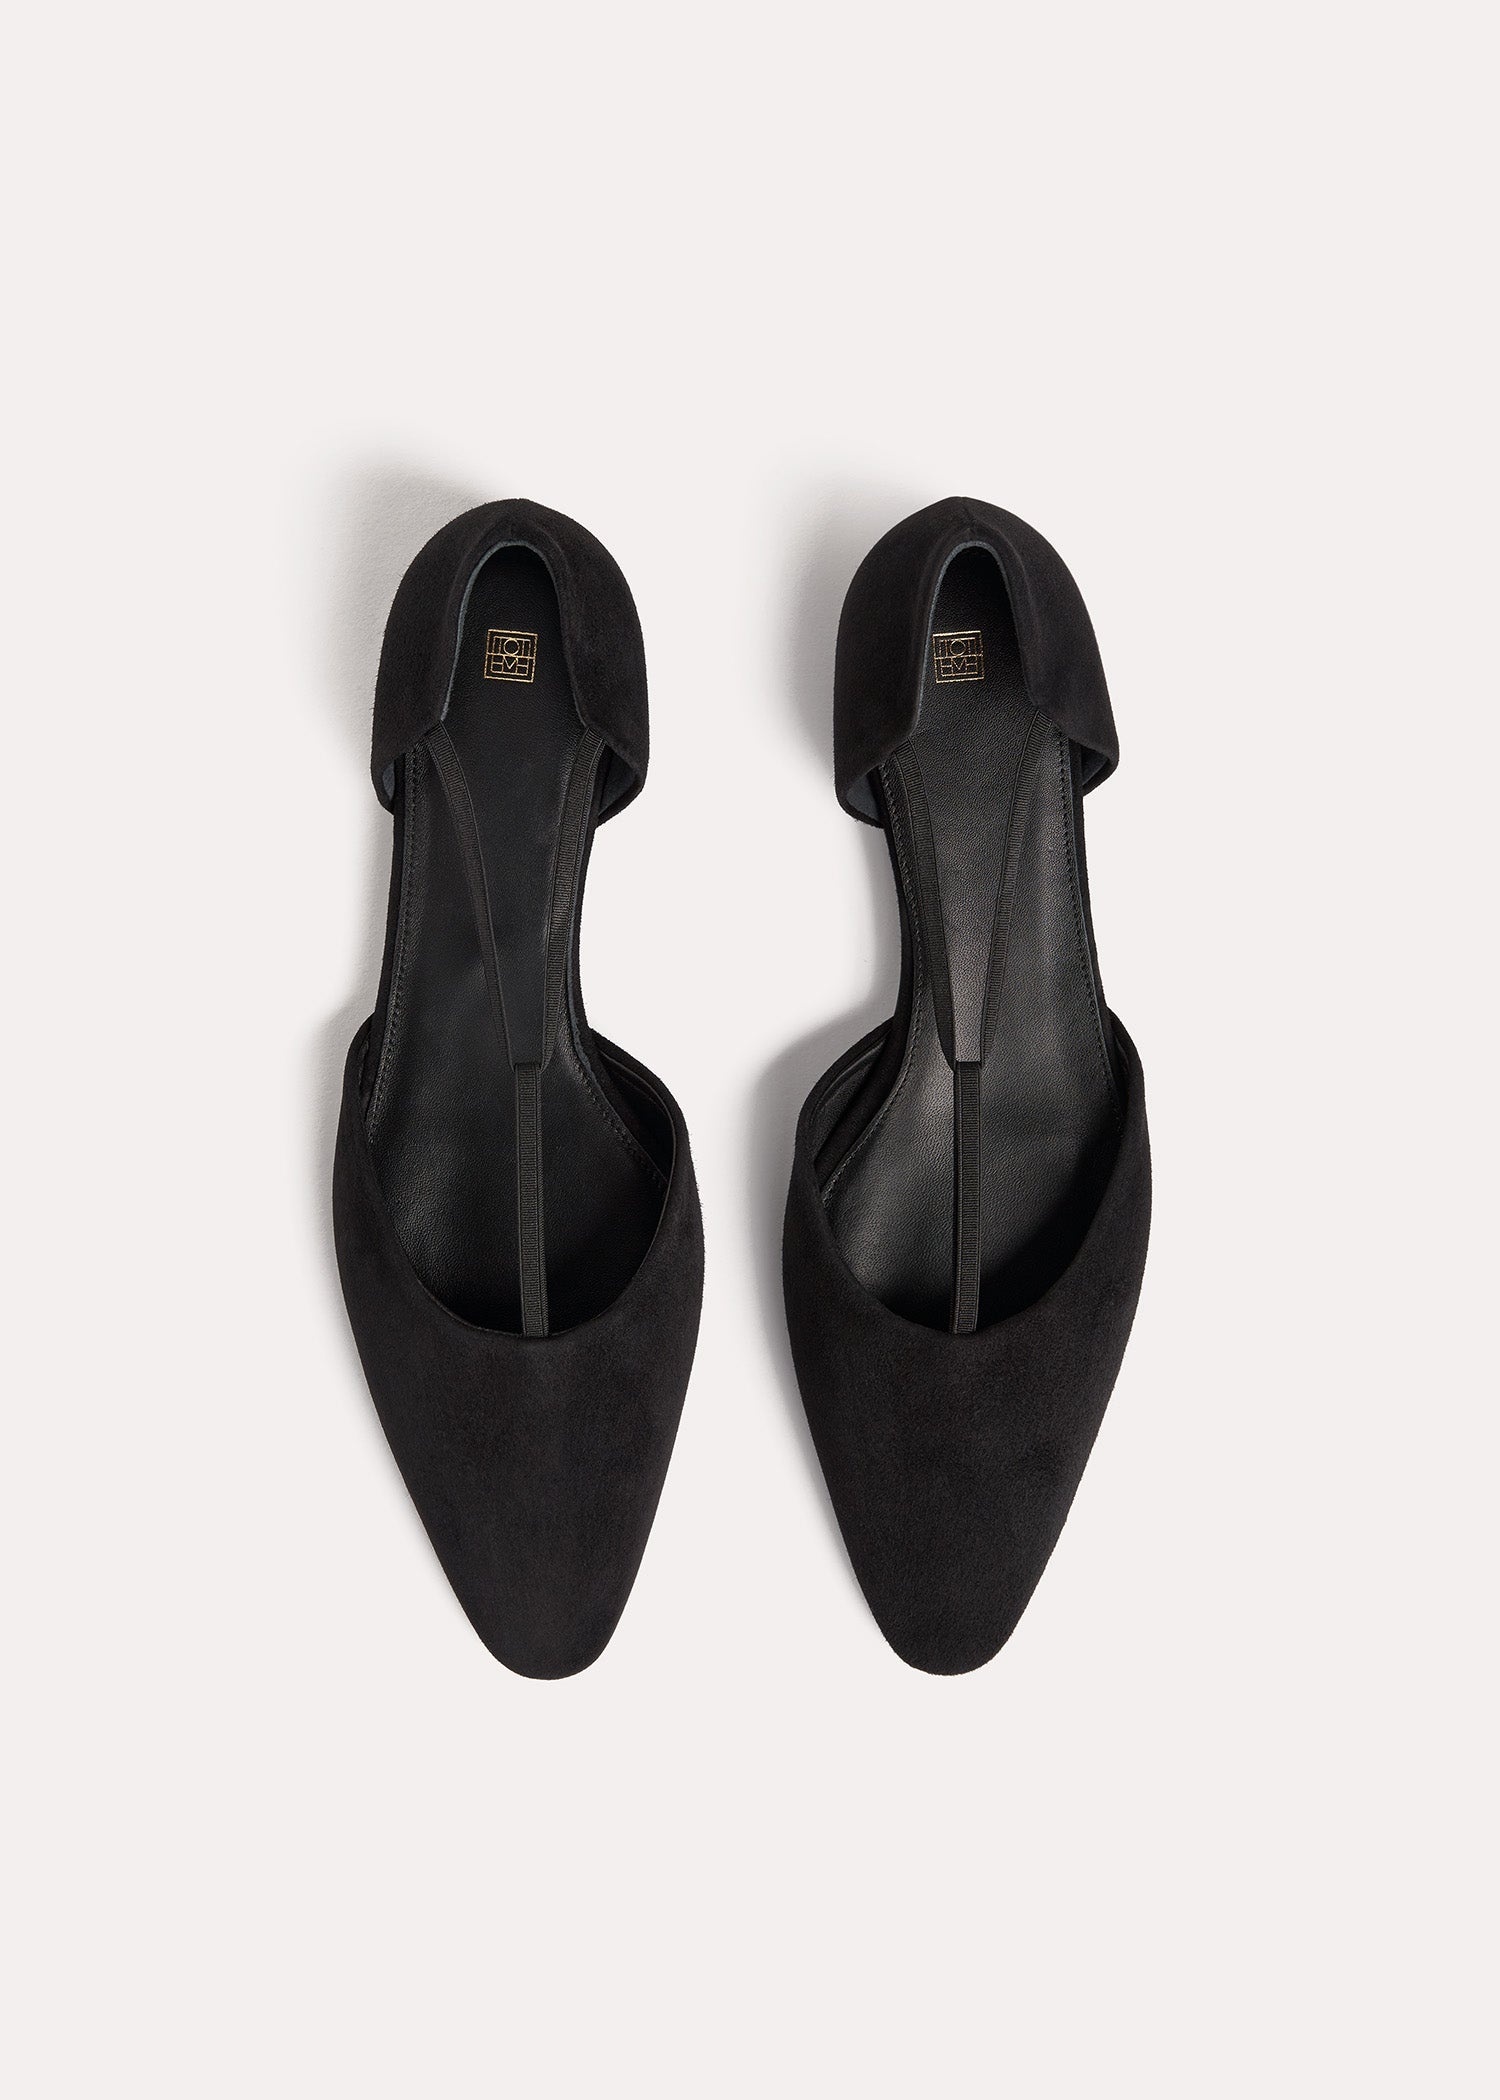 The Suede T-Strap Flat black - 4